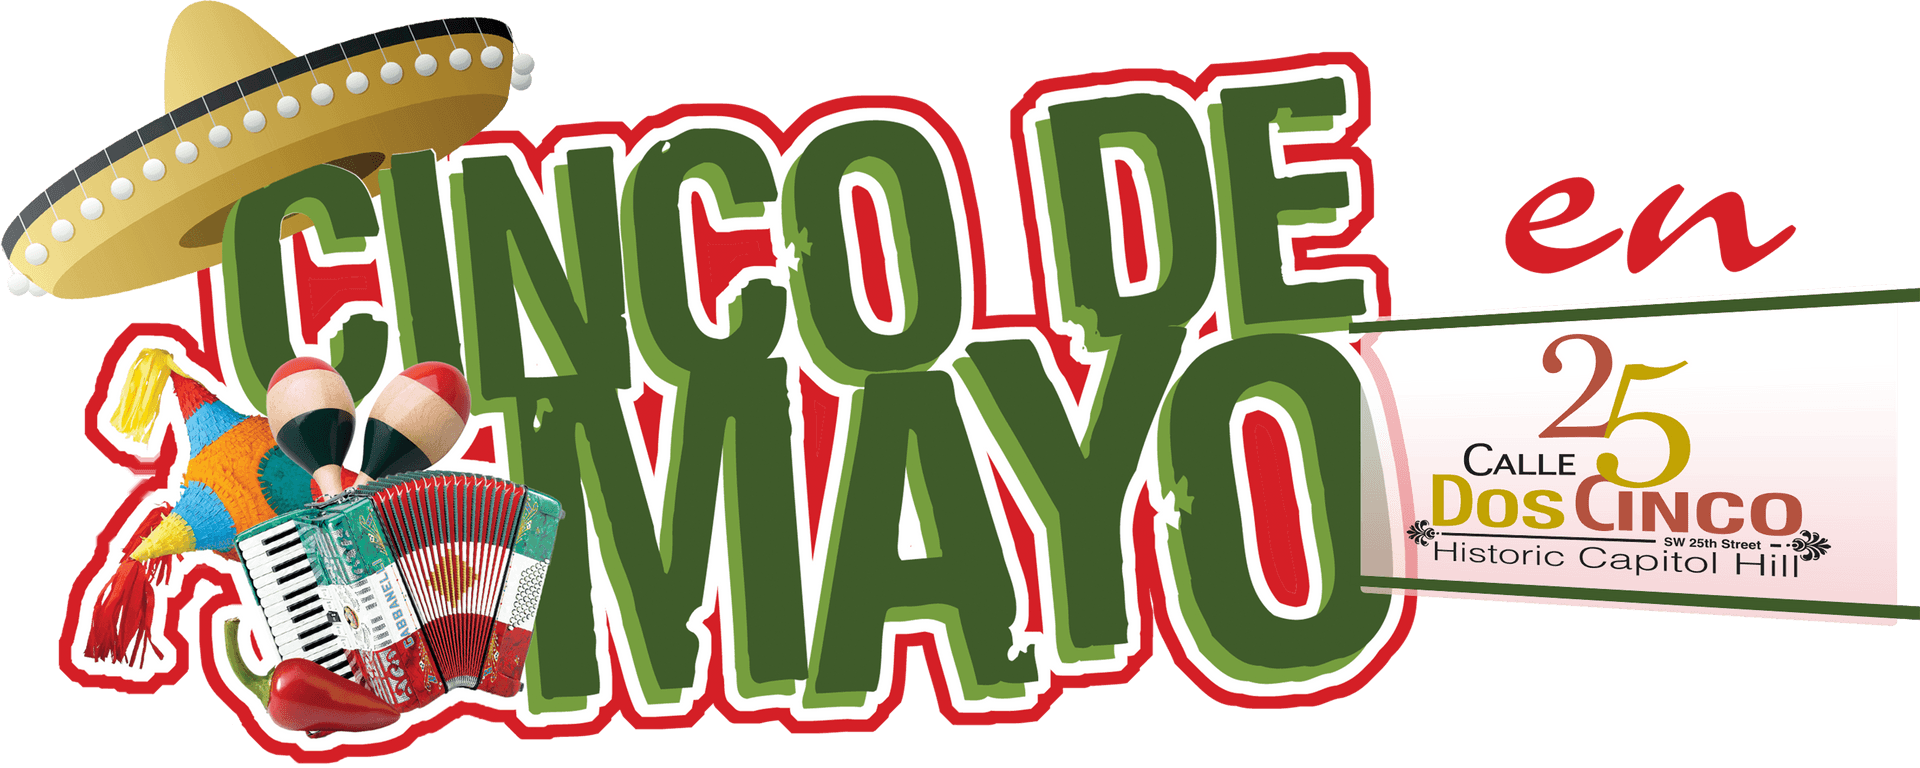 Cincode Mayo Festival Graphic PNG